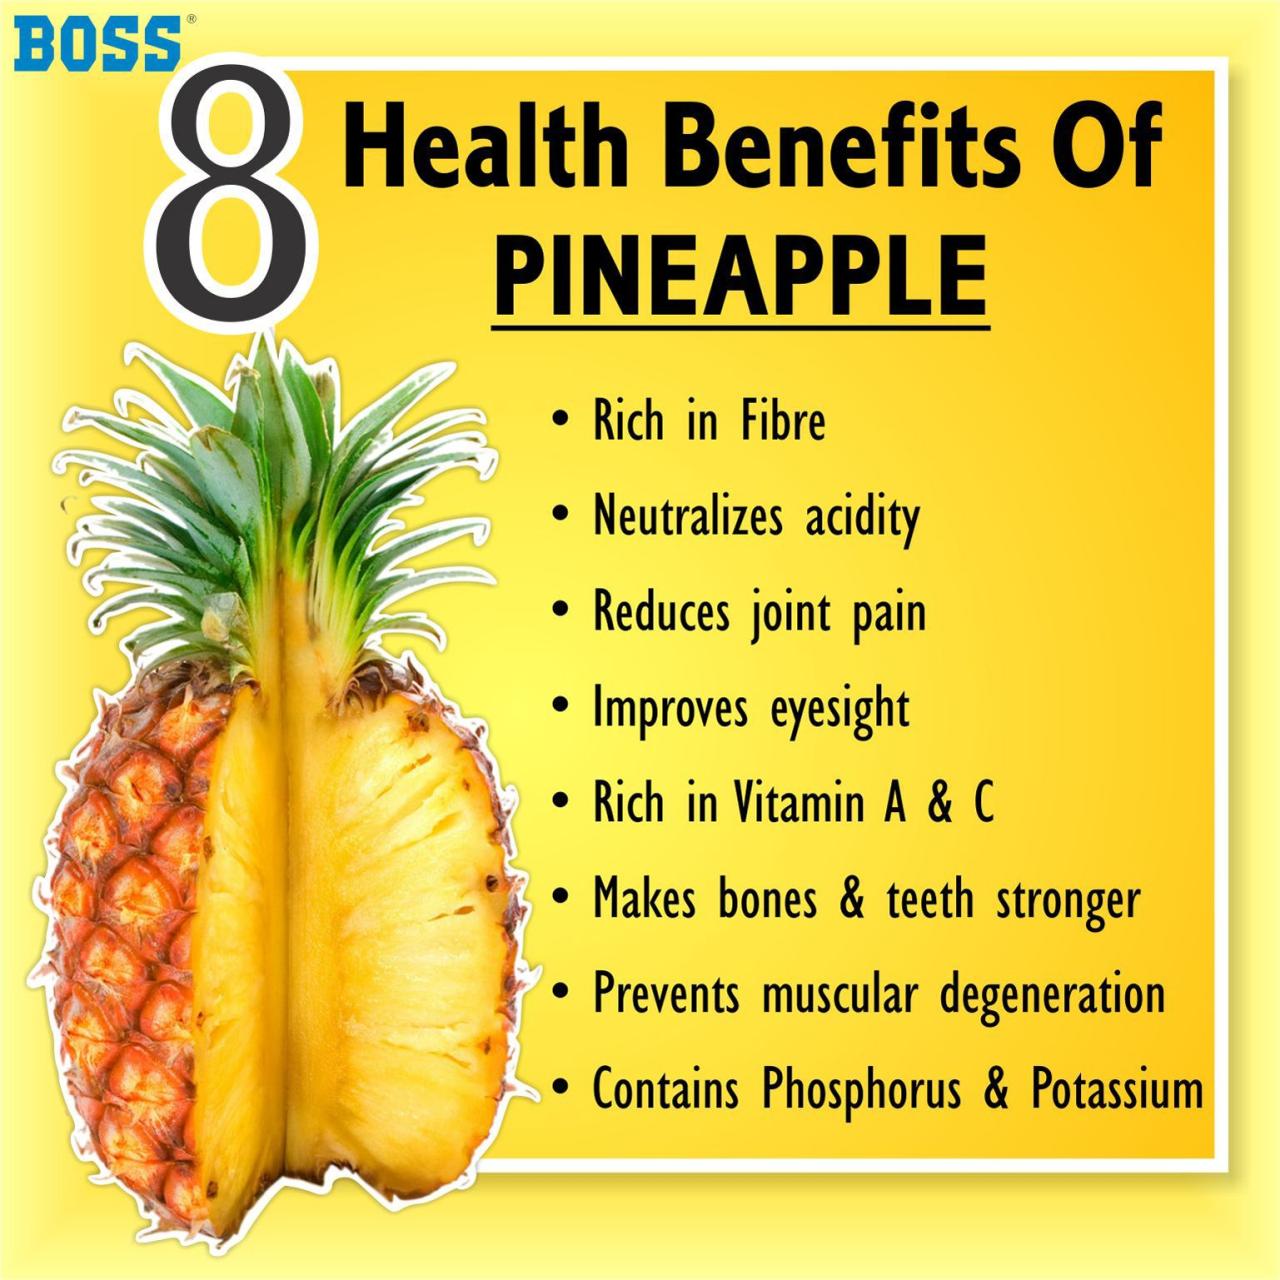 Pineapple benefits health fattening infographic does part otherwise pineapples acceptable healthy